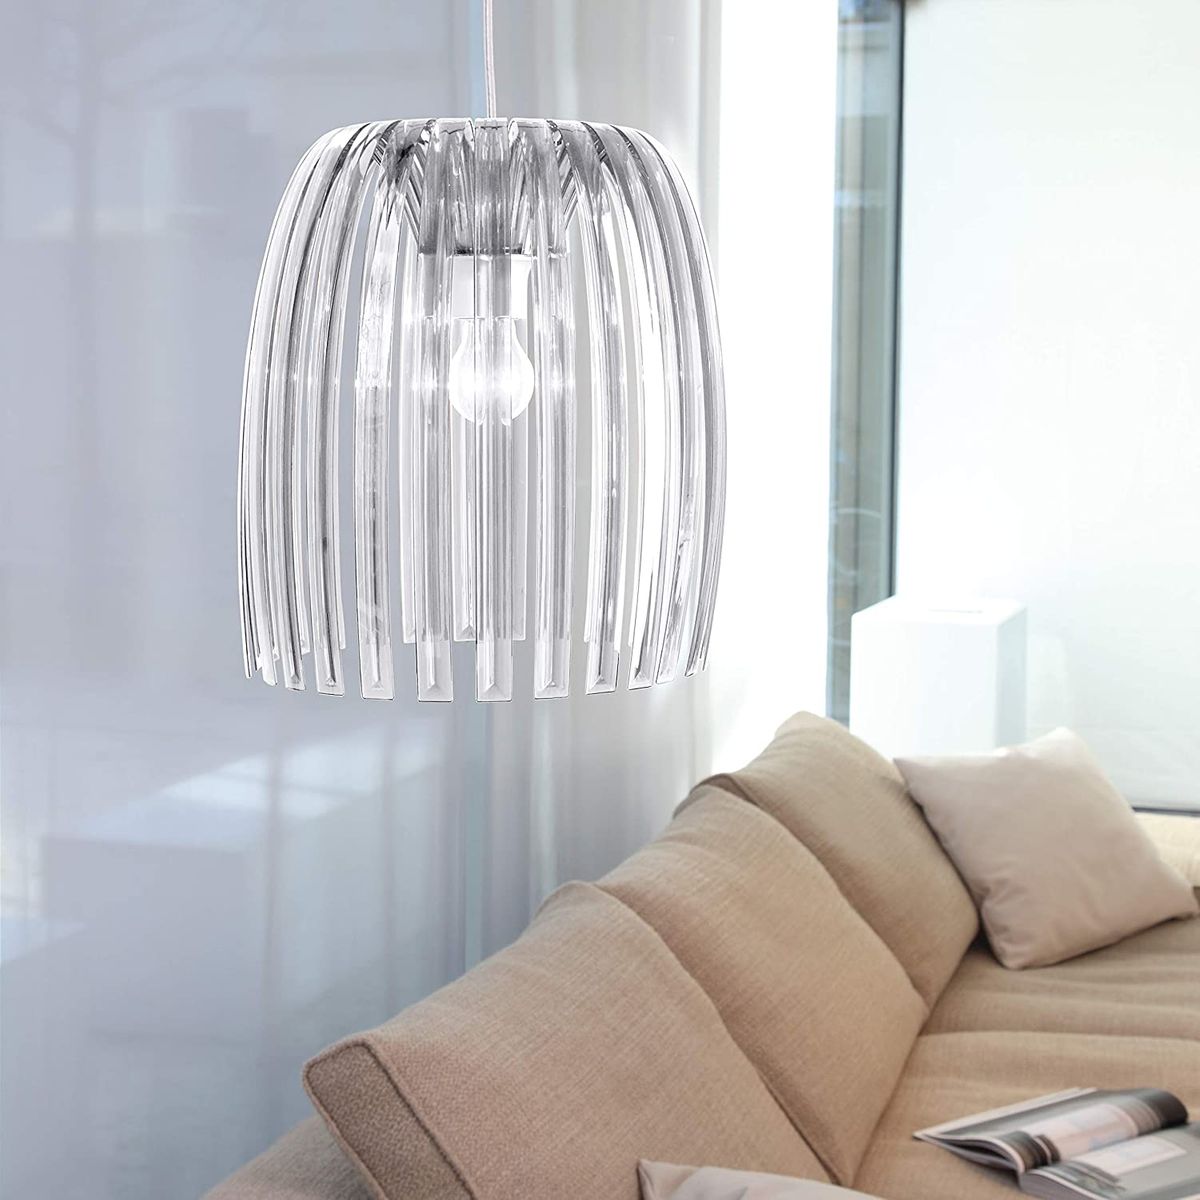 Koziol lampshade thermoplastic plastic, crystal clear